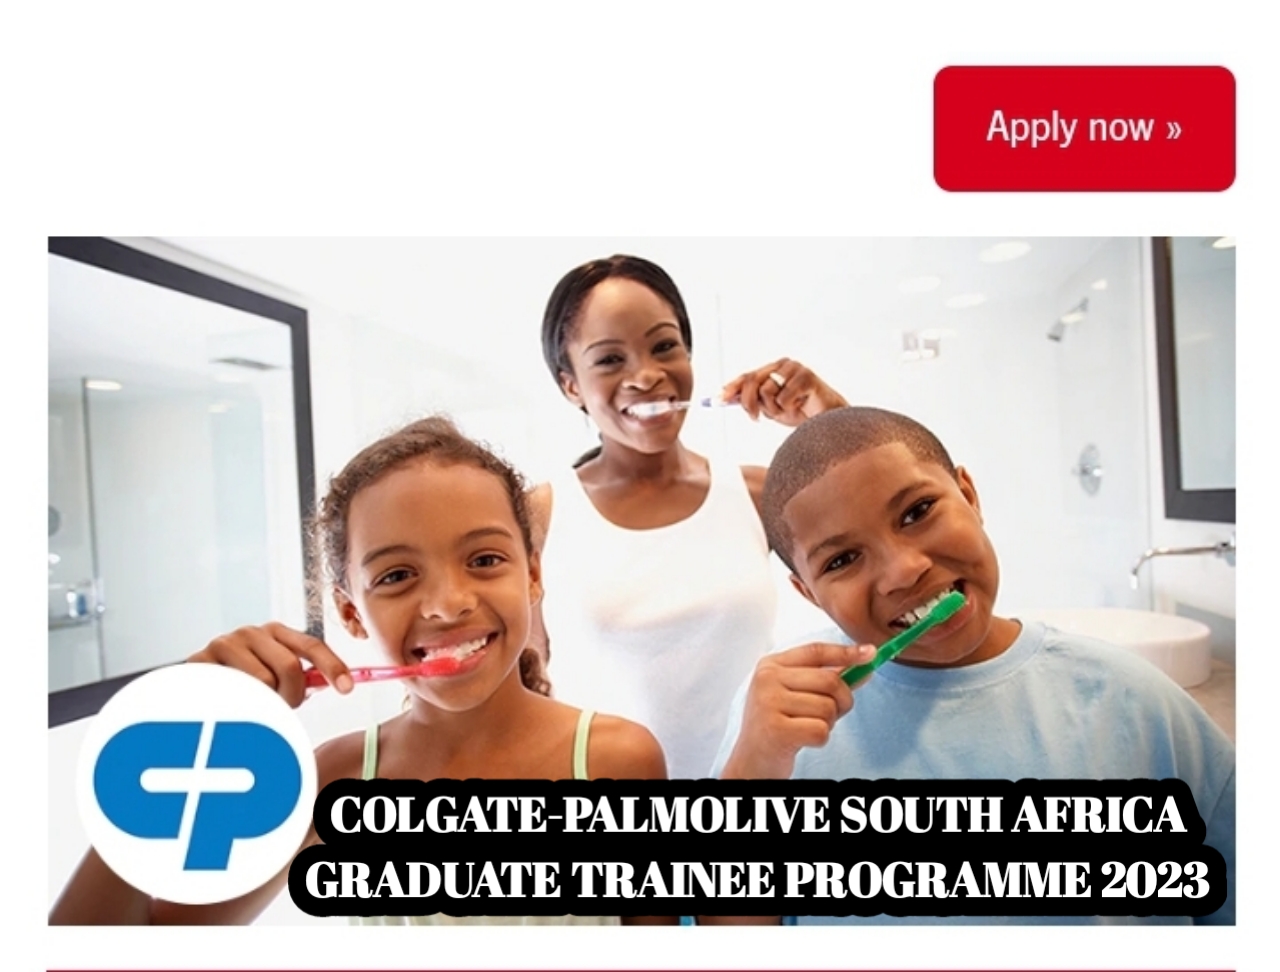 Apply: Colgate-Palmolive South Africa Graduate Trainee Programme 2023